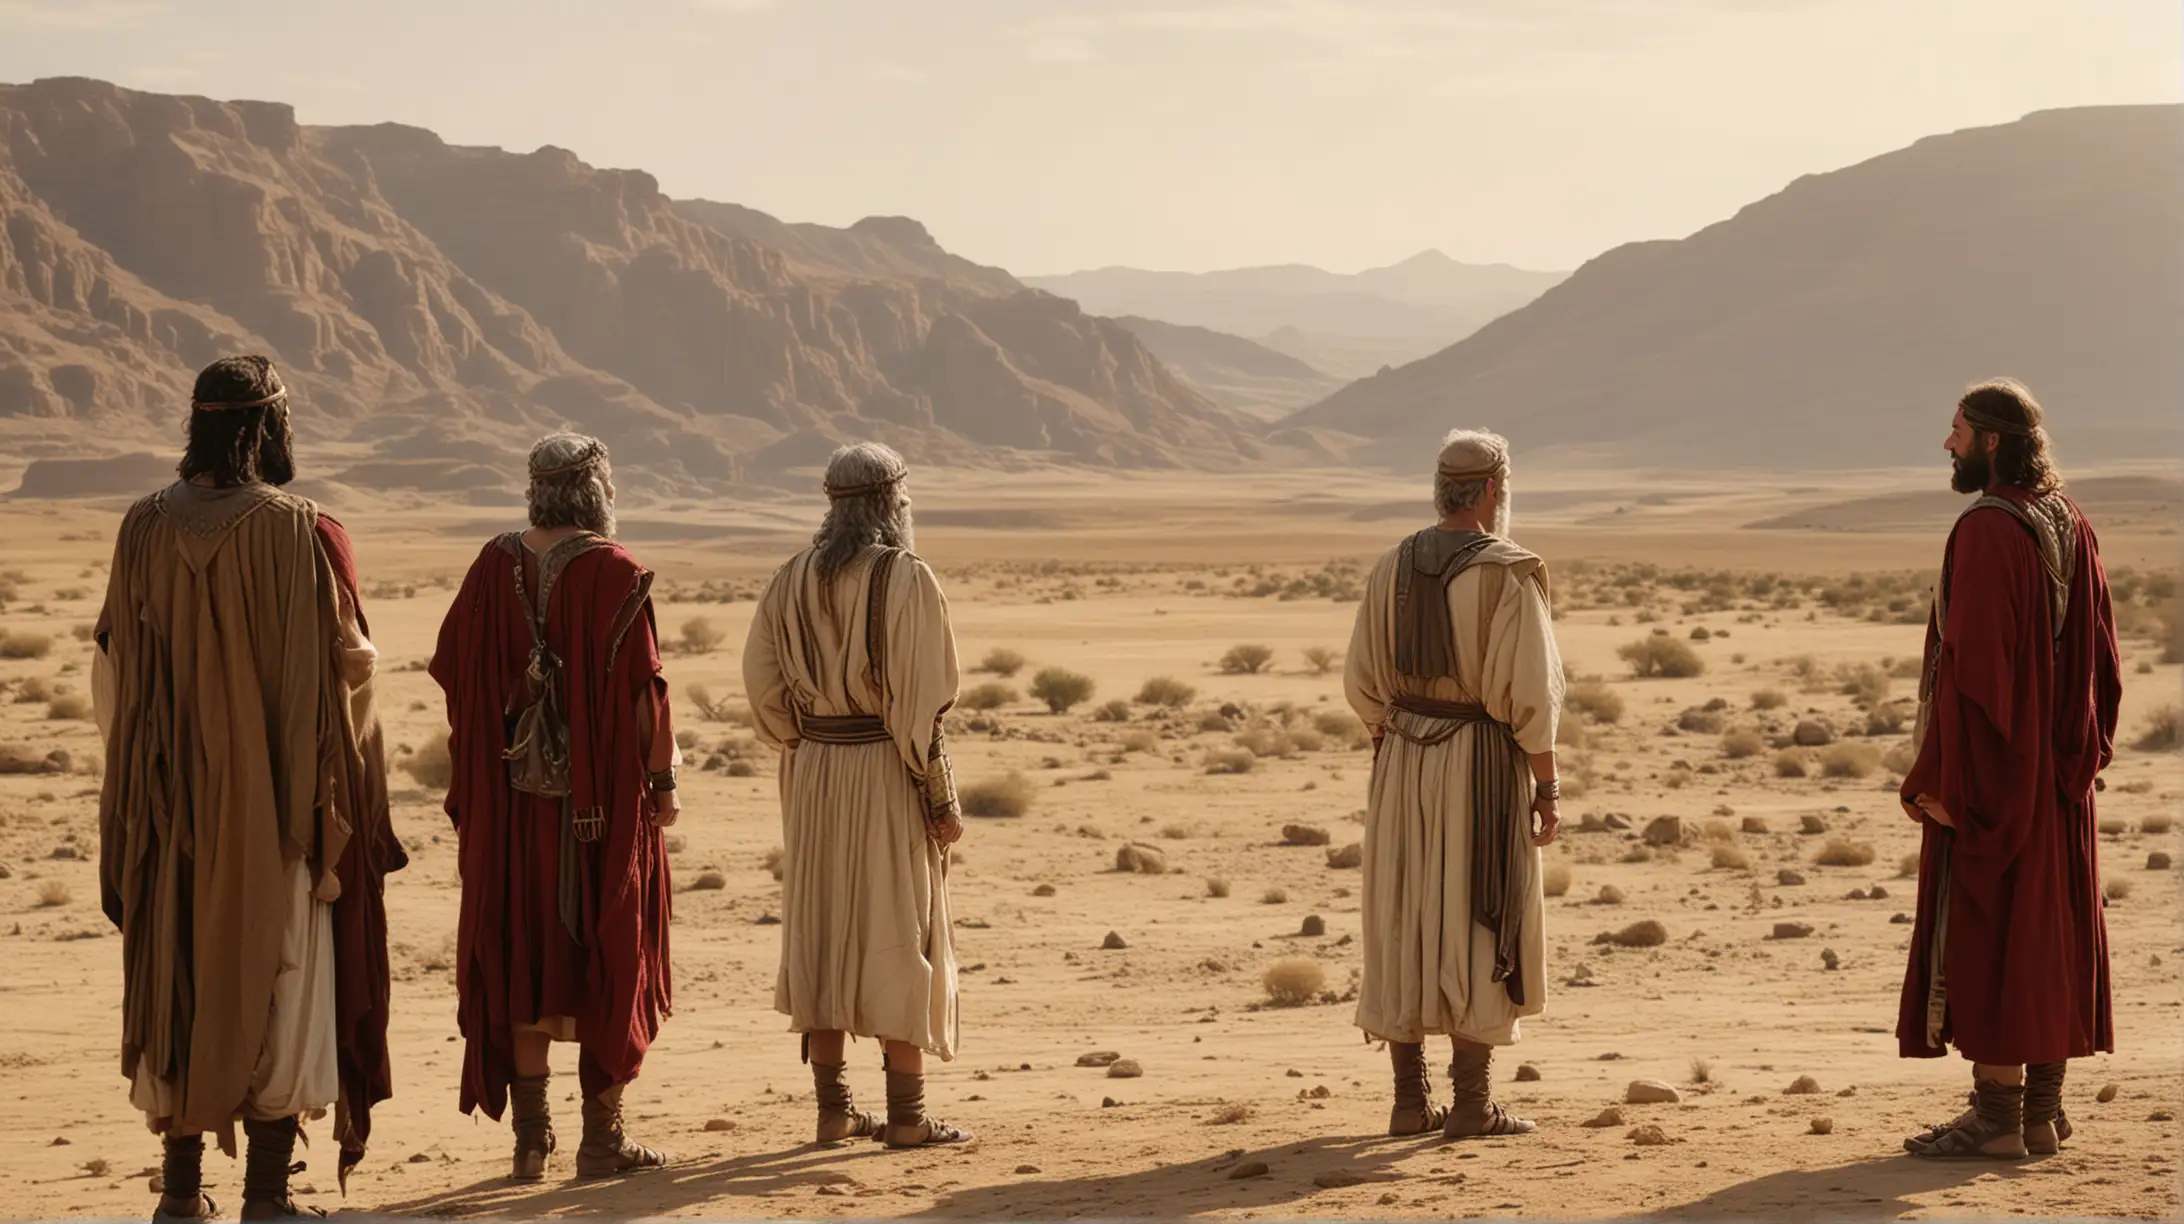 Biblical Era Five Kings Confer in the Desert with Moses People in the Distance